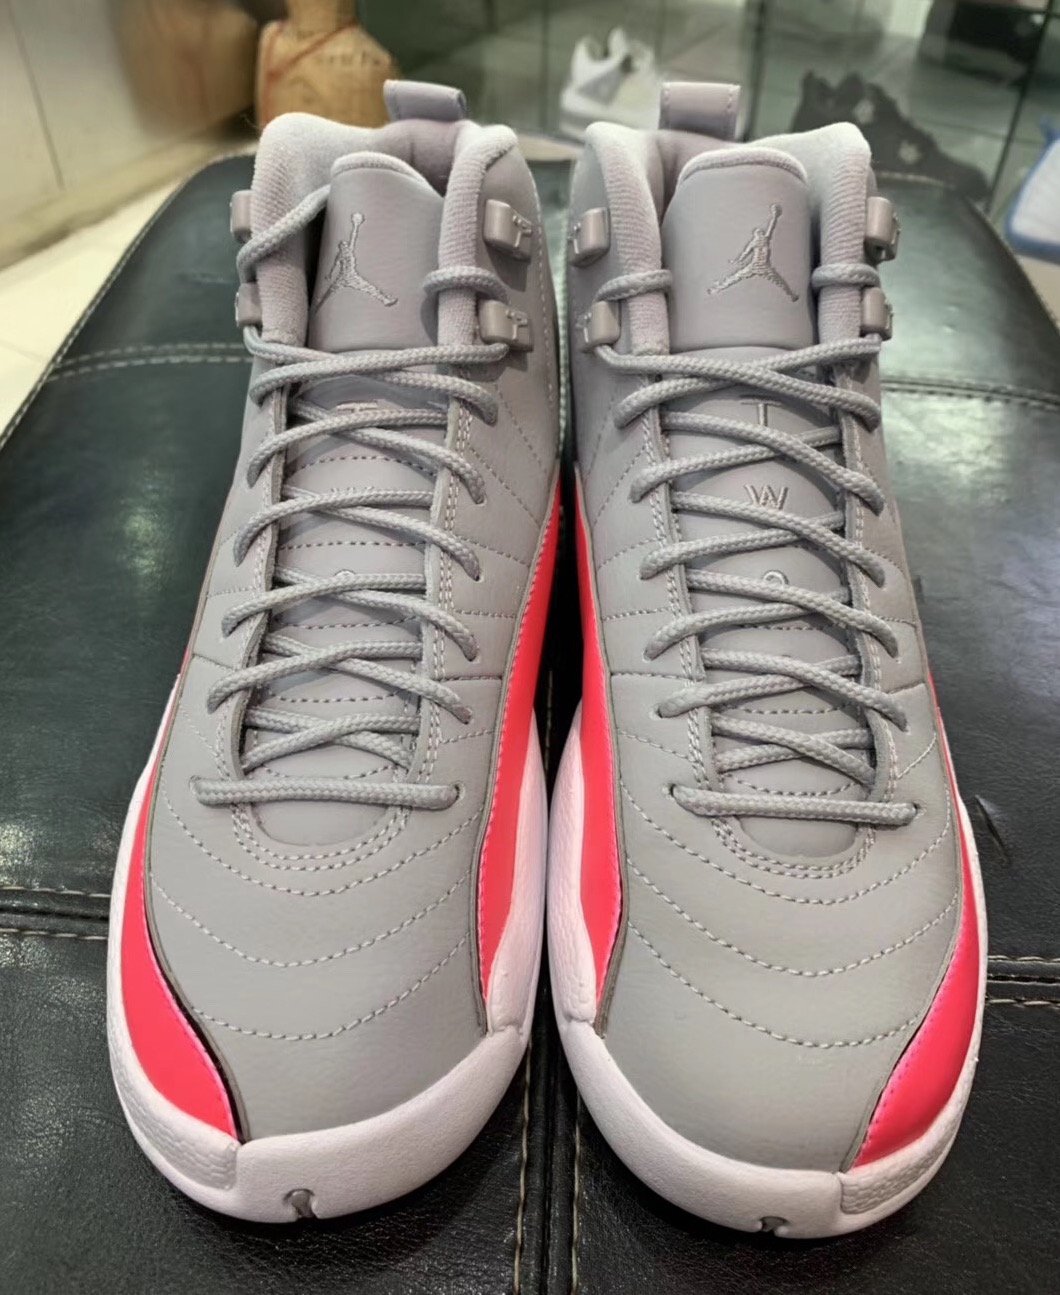 pink and grey 12s